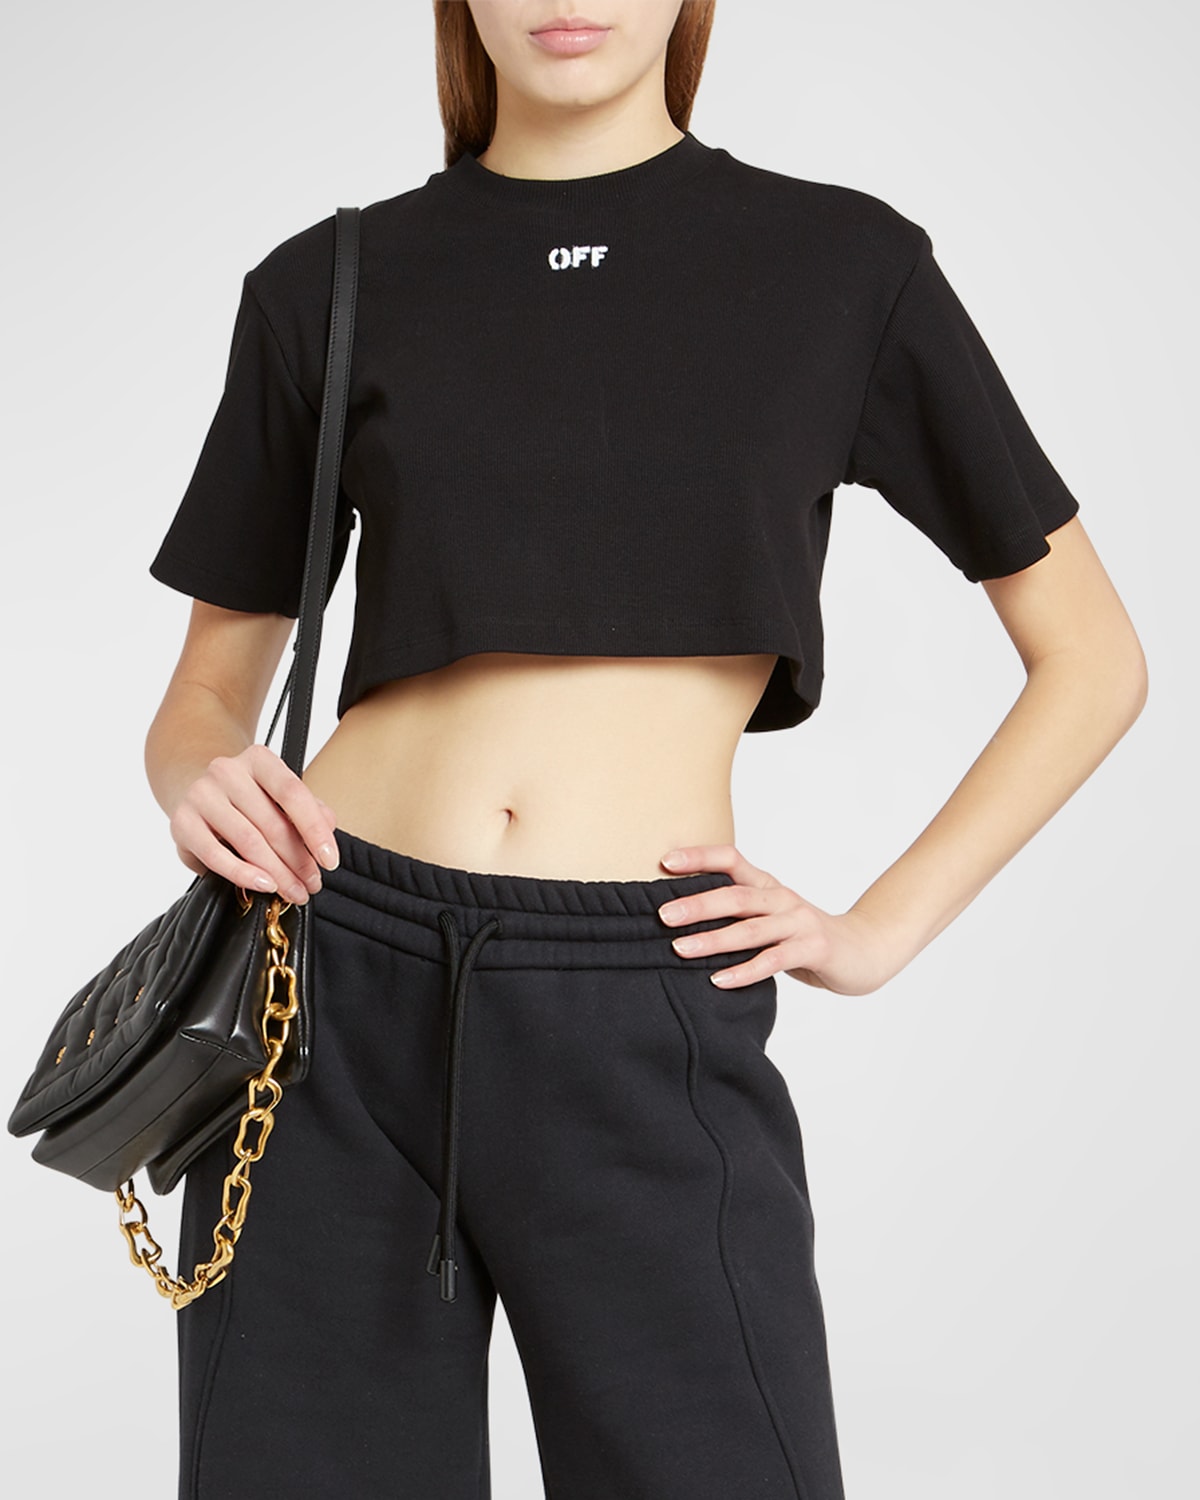 Off-Stamp Cropped Tee